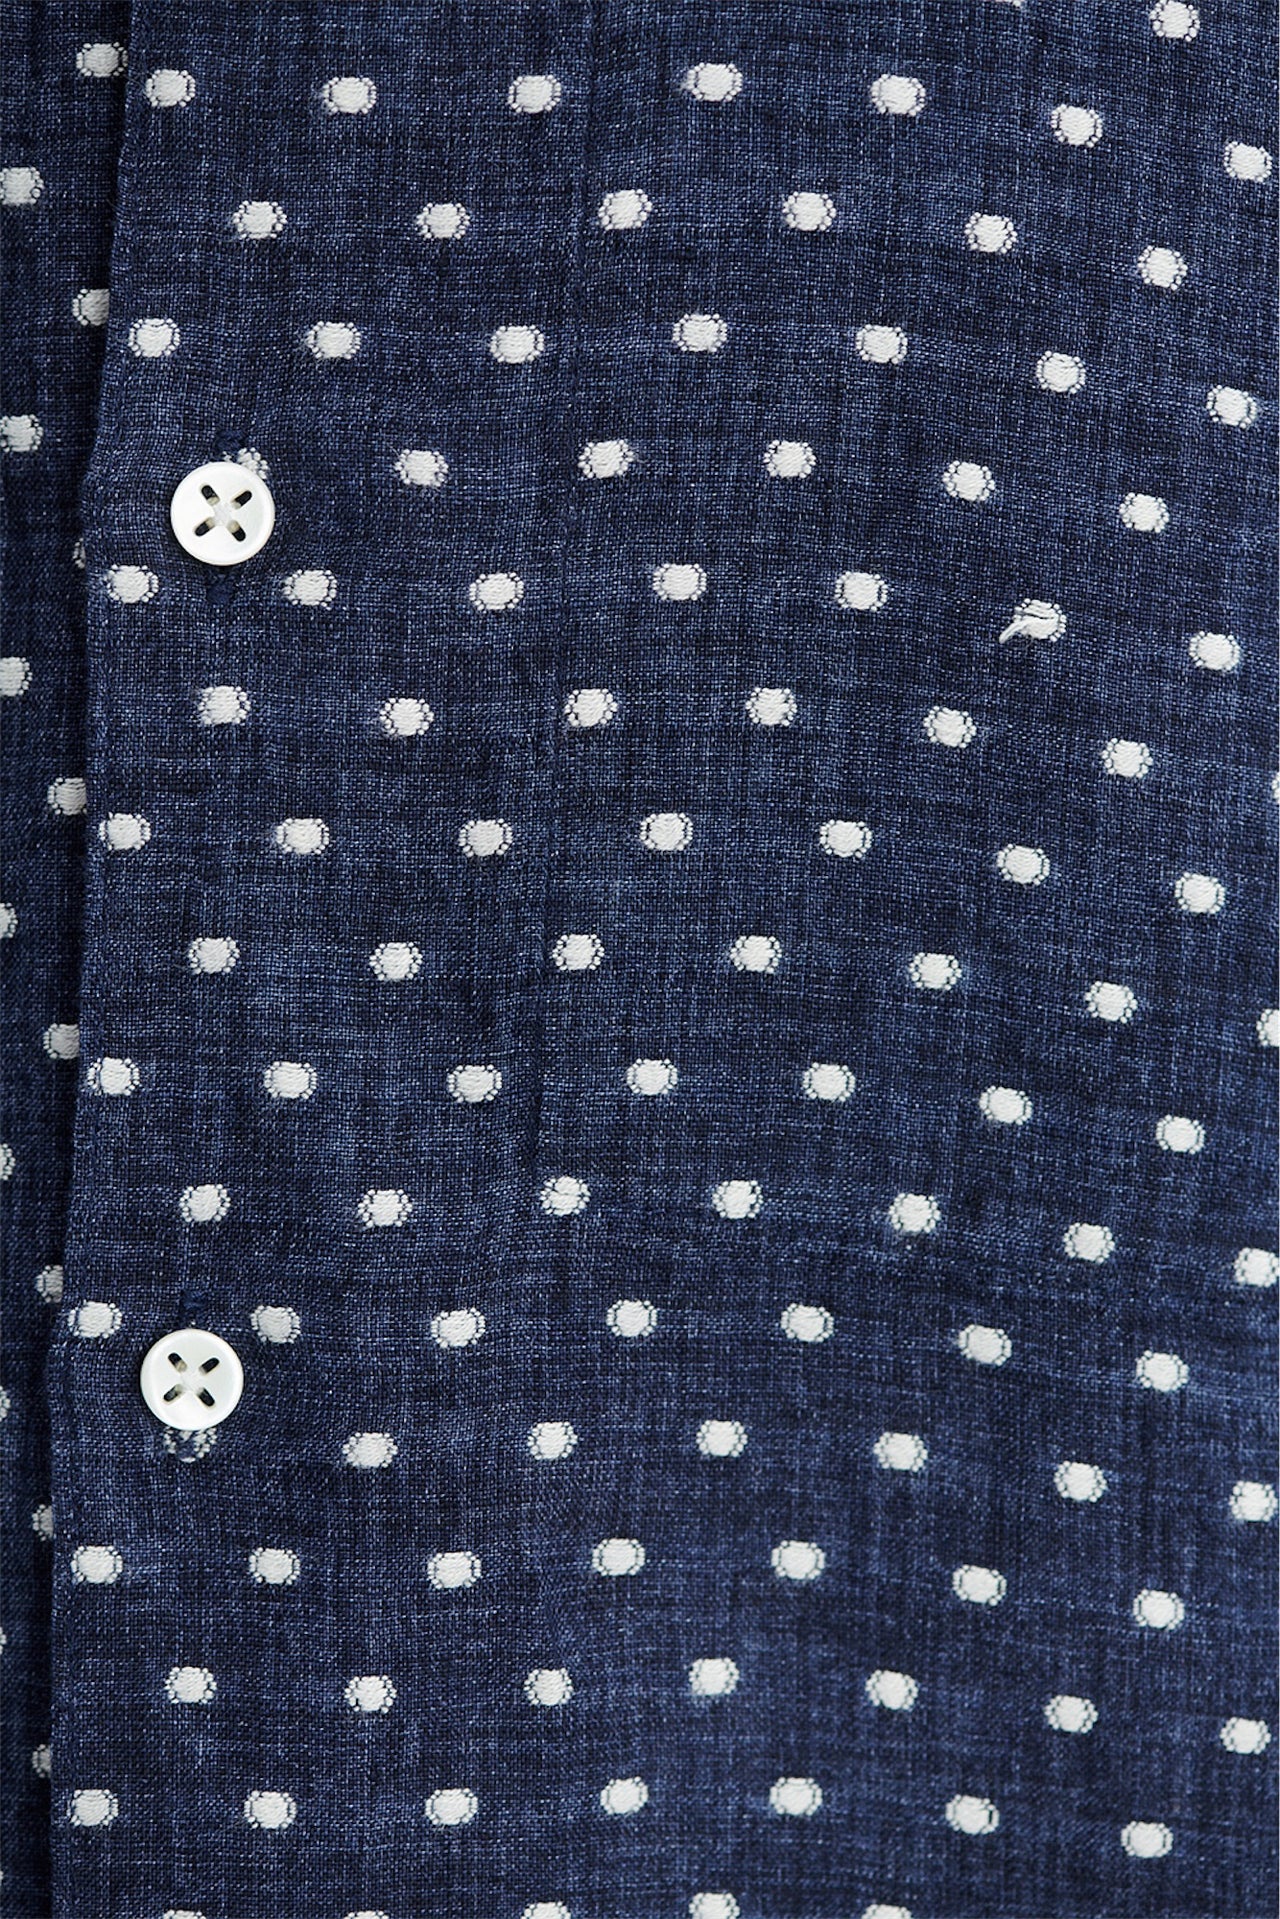 Feel Good Shirt in a Navy Dotted Delavé Italian Linen